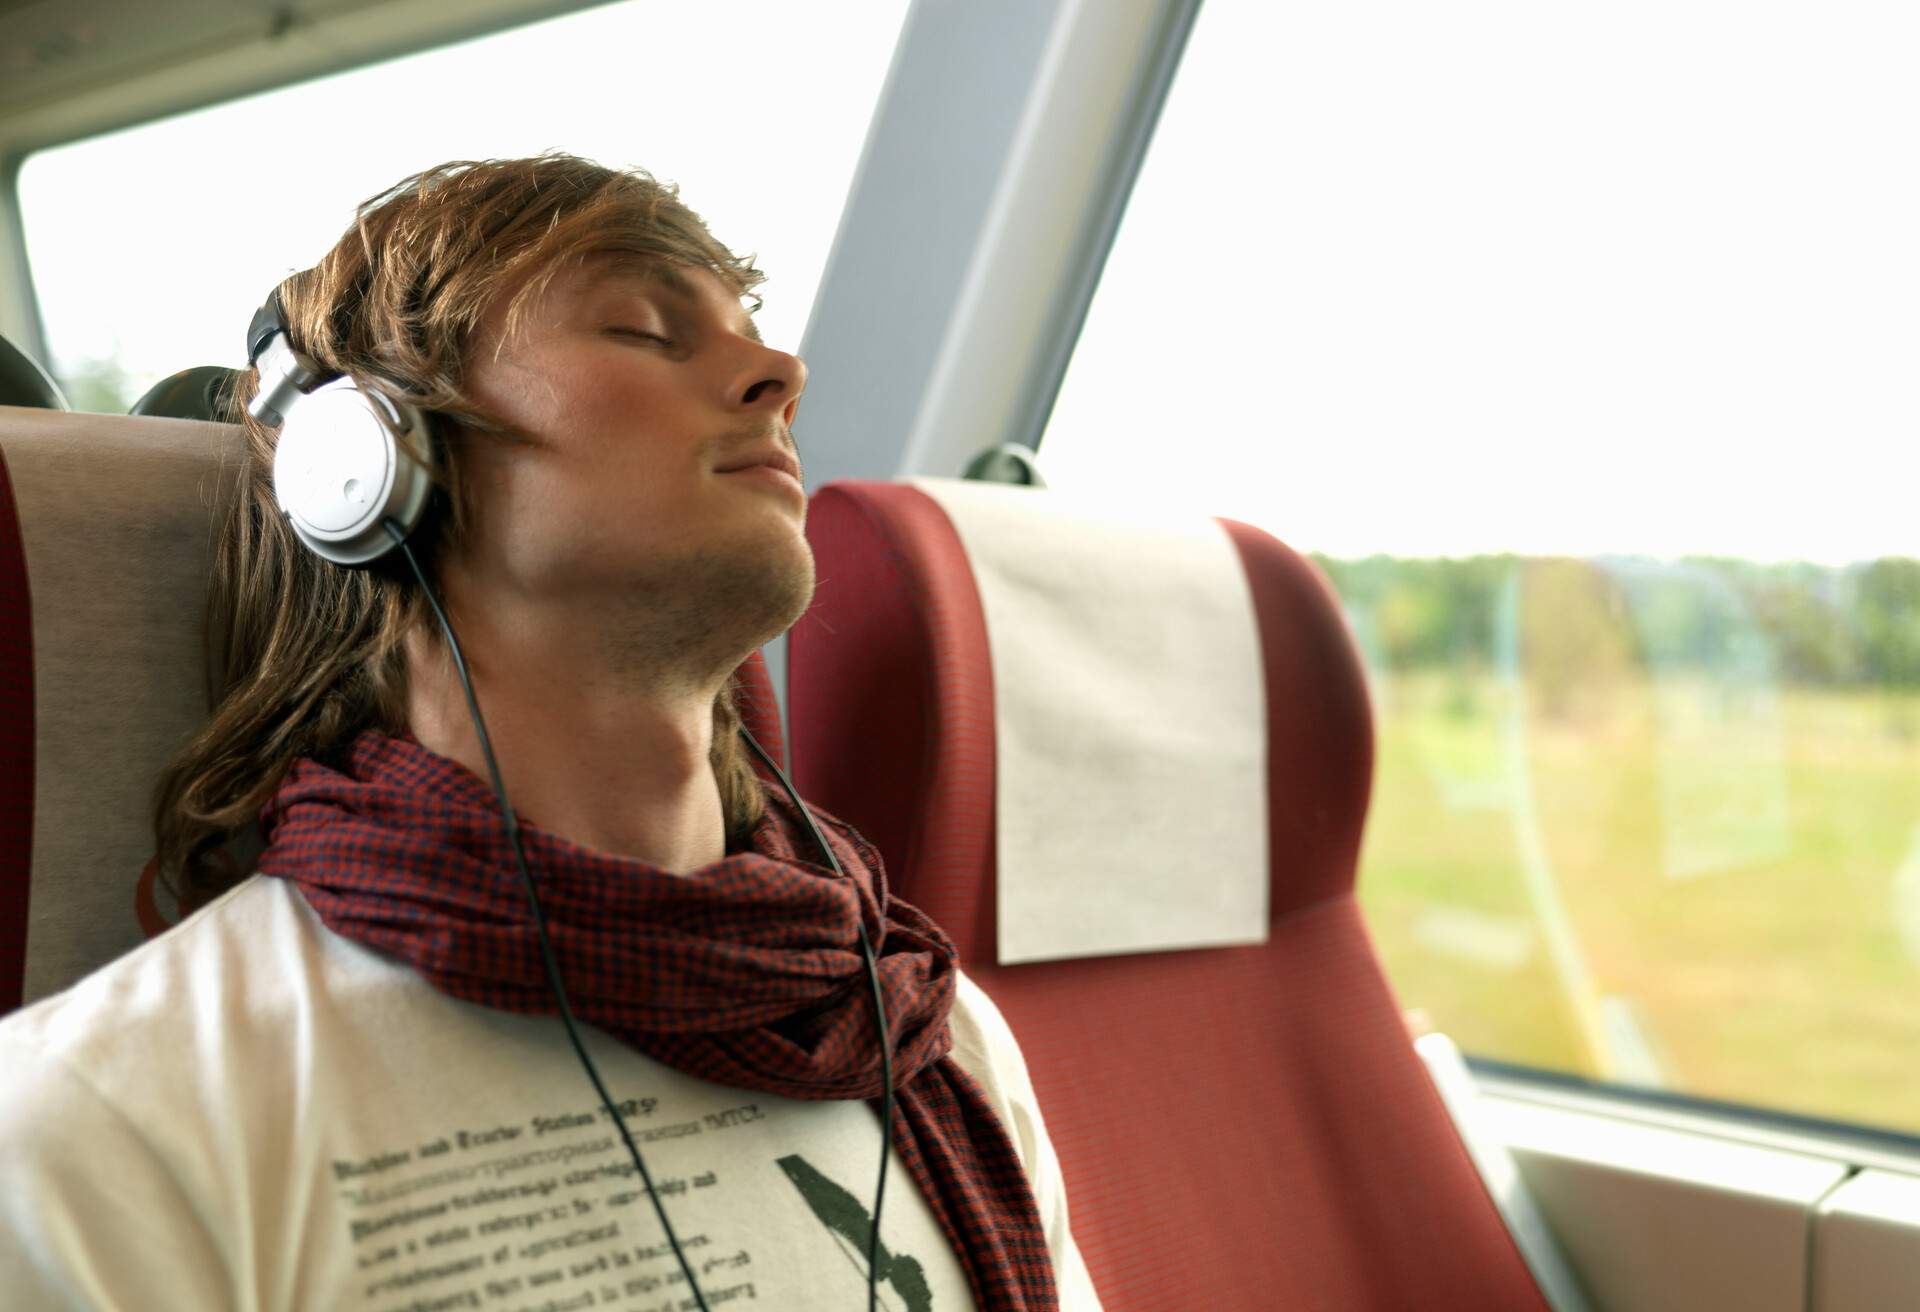 THEME_TRAIN_TRAVEL_PEOPLE_MAN_WITH_HEADPHONES_GettyImages-83779271